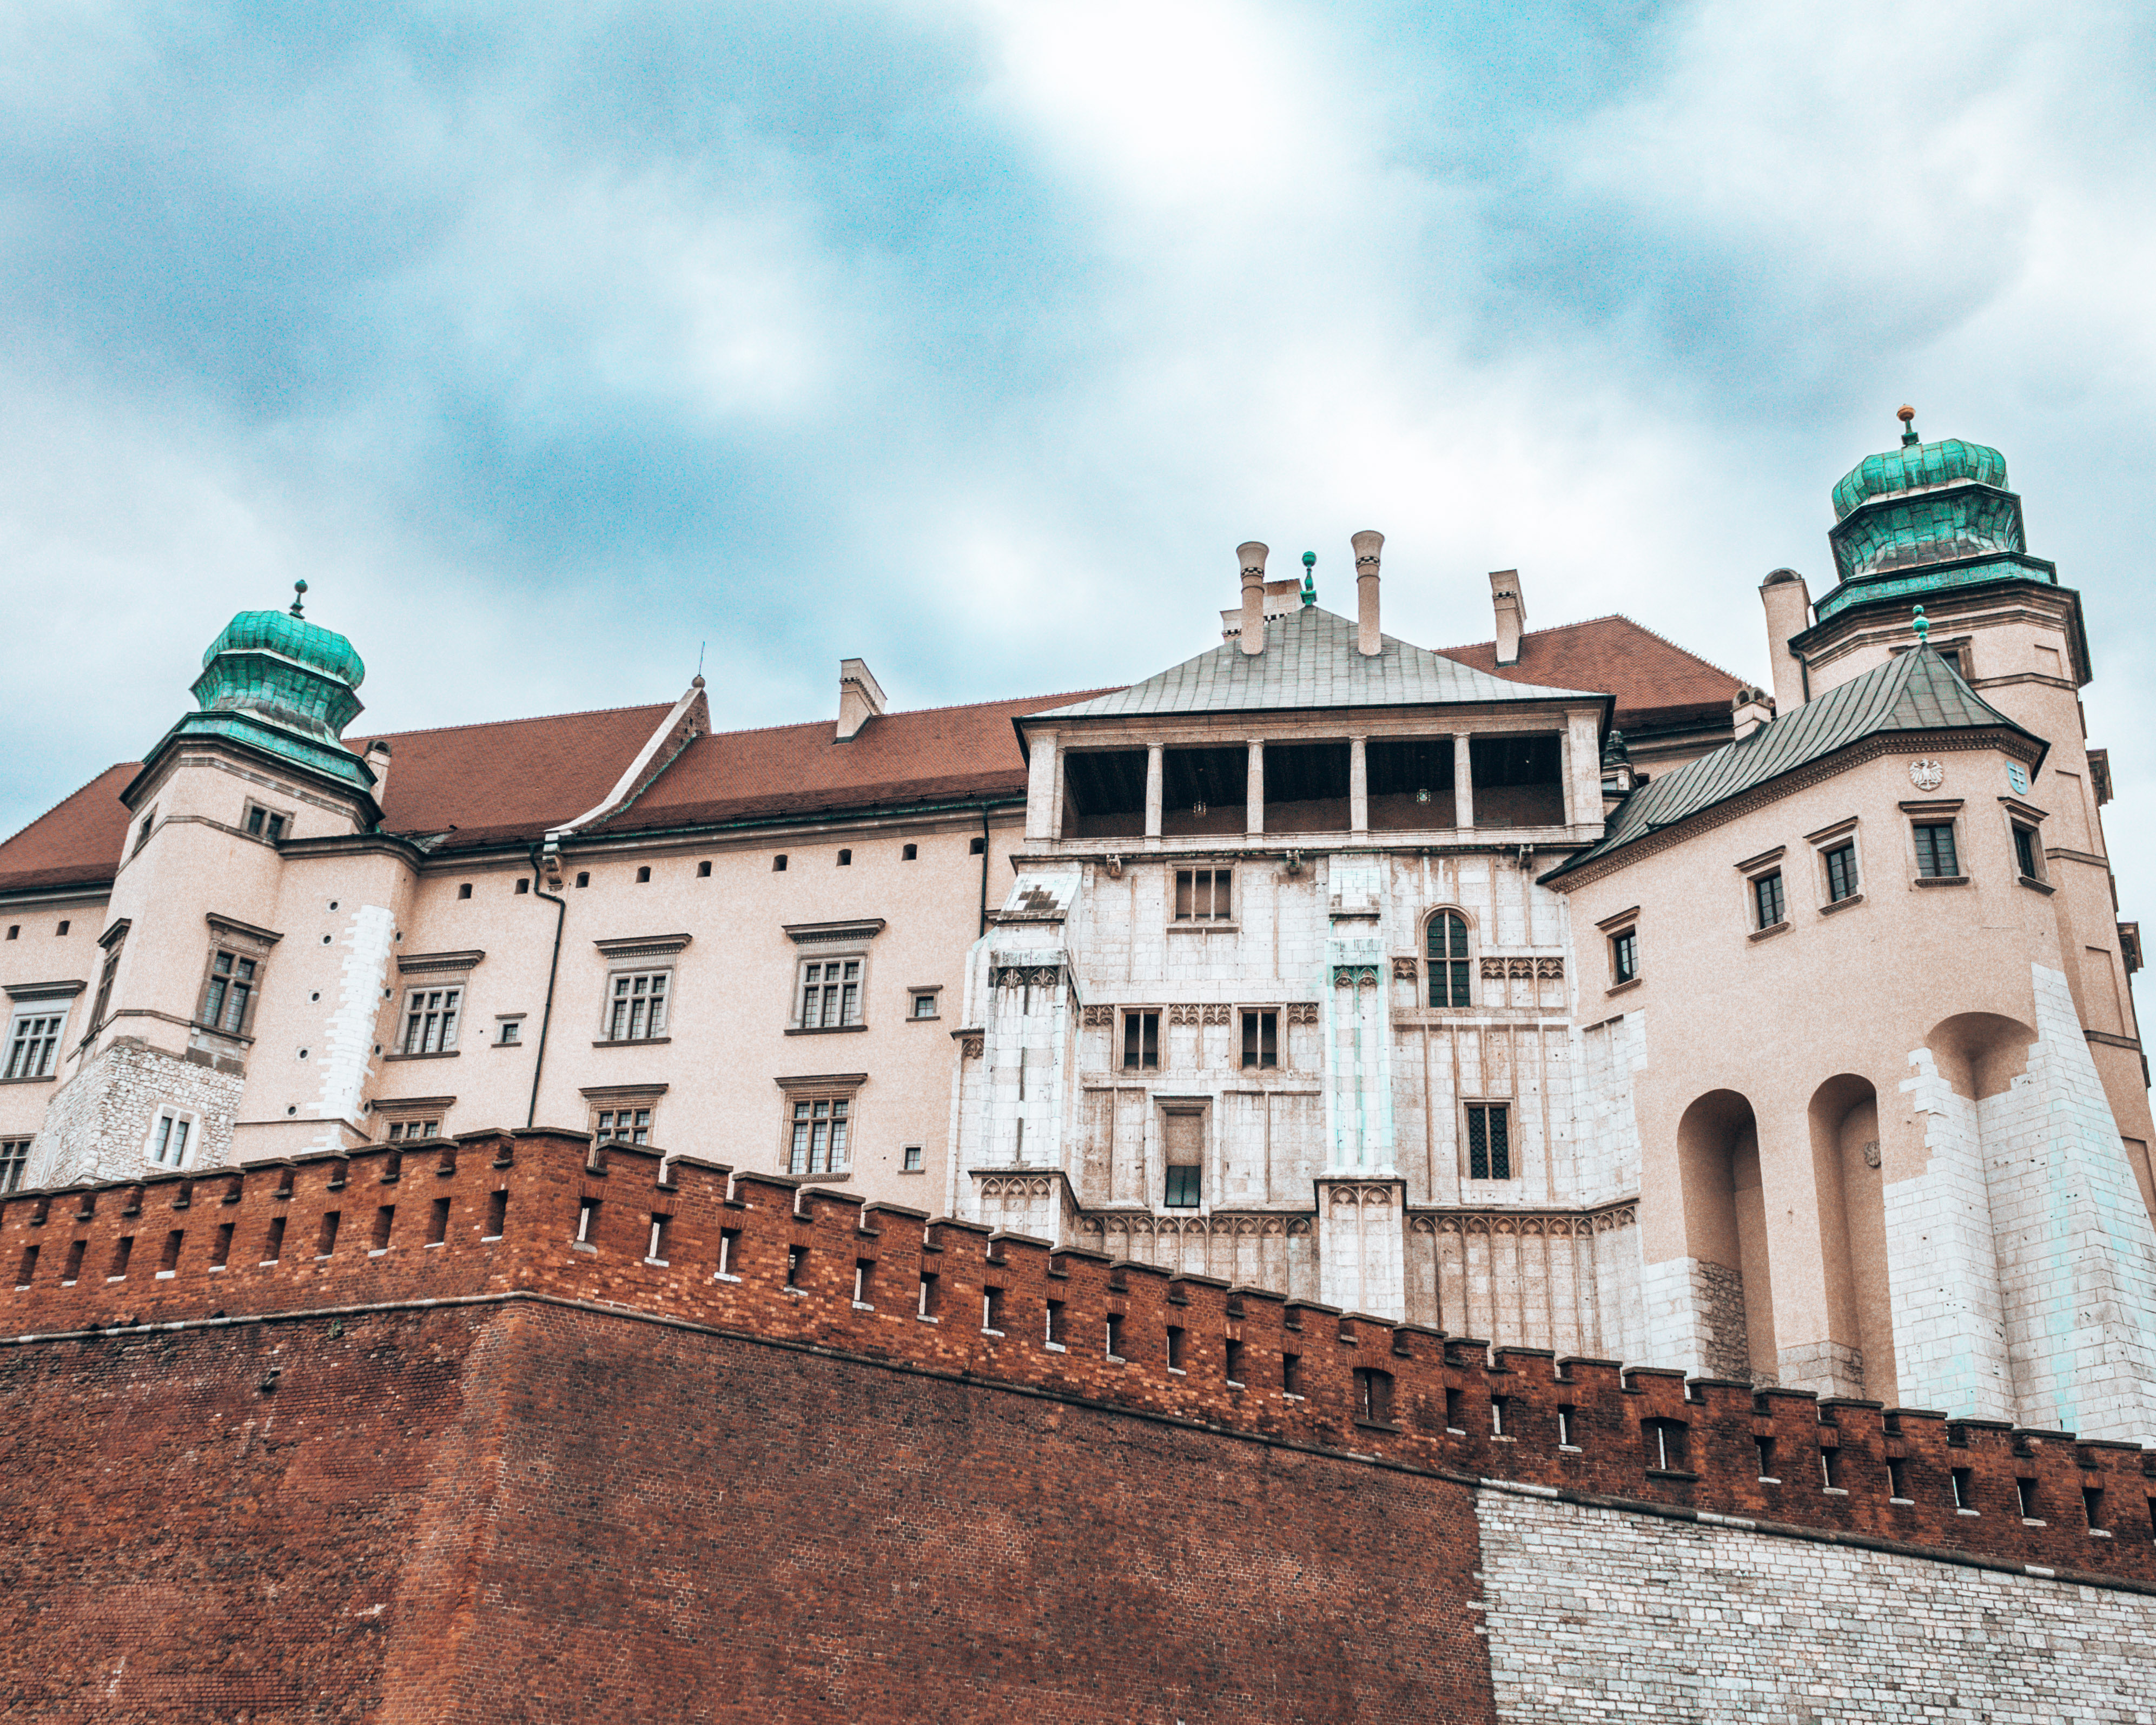 The view from the front of the Wawel castle in Krakow, Poland